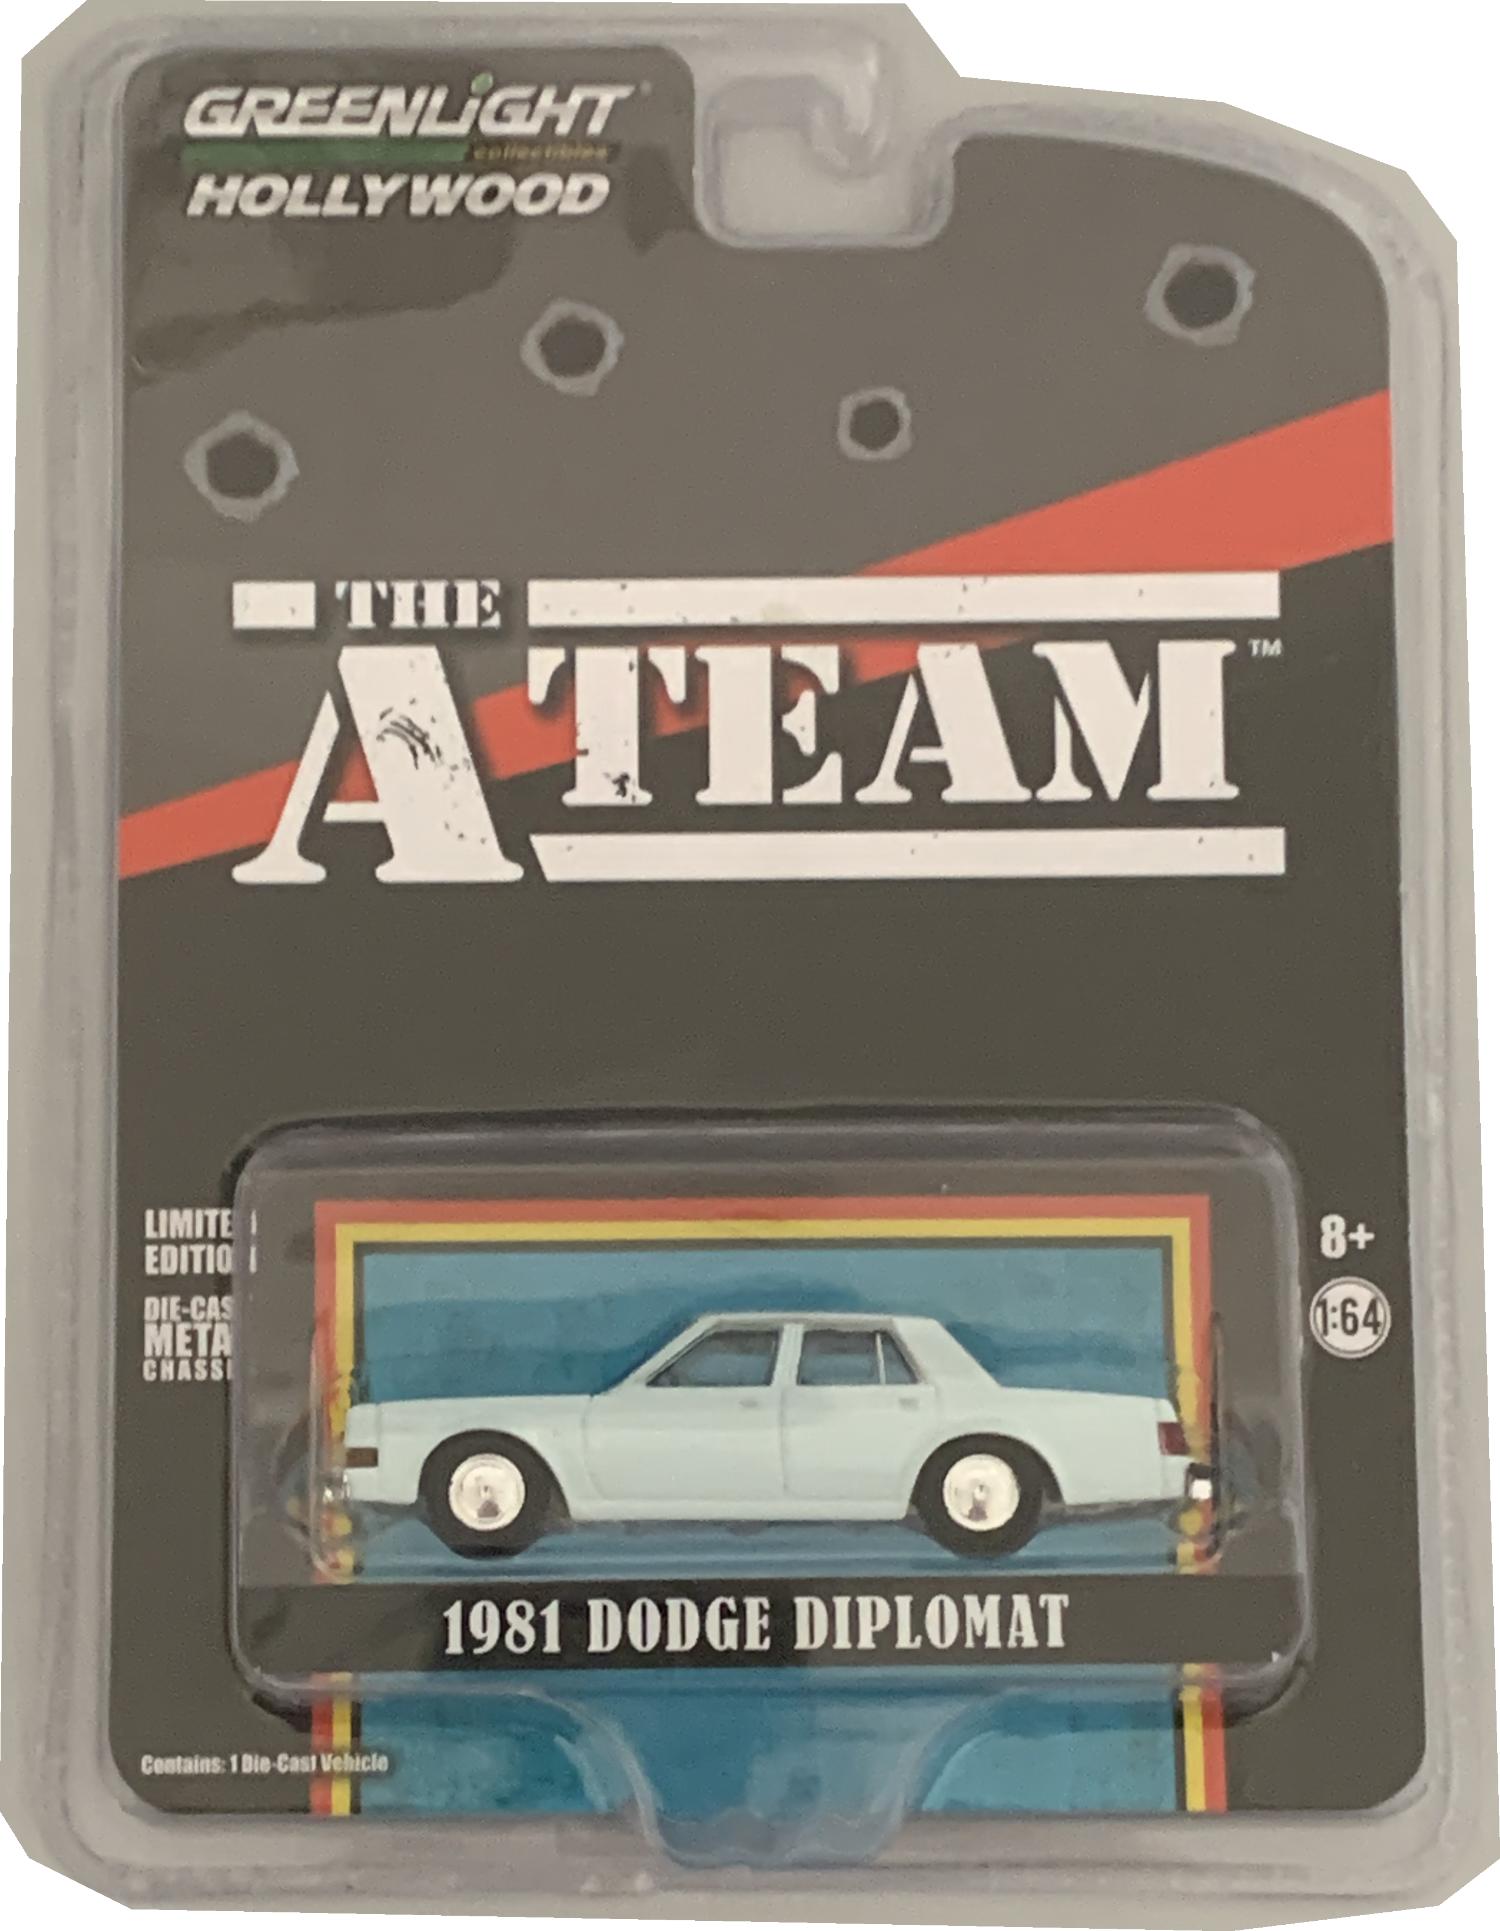 The A Team, 1981 Dodge Diplomat in pale blue 1:64 scale model from Greenlight, Limited Edition model